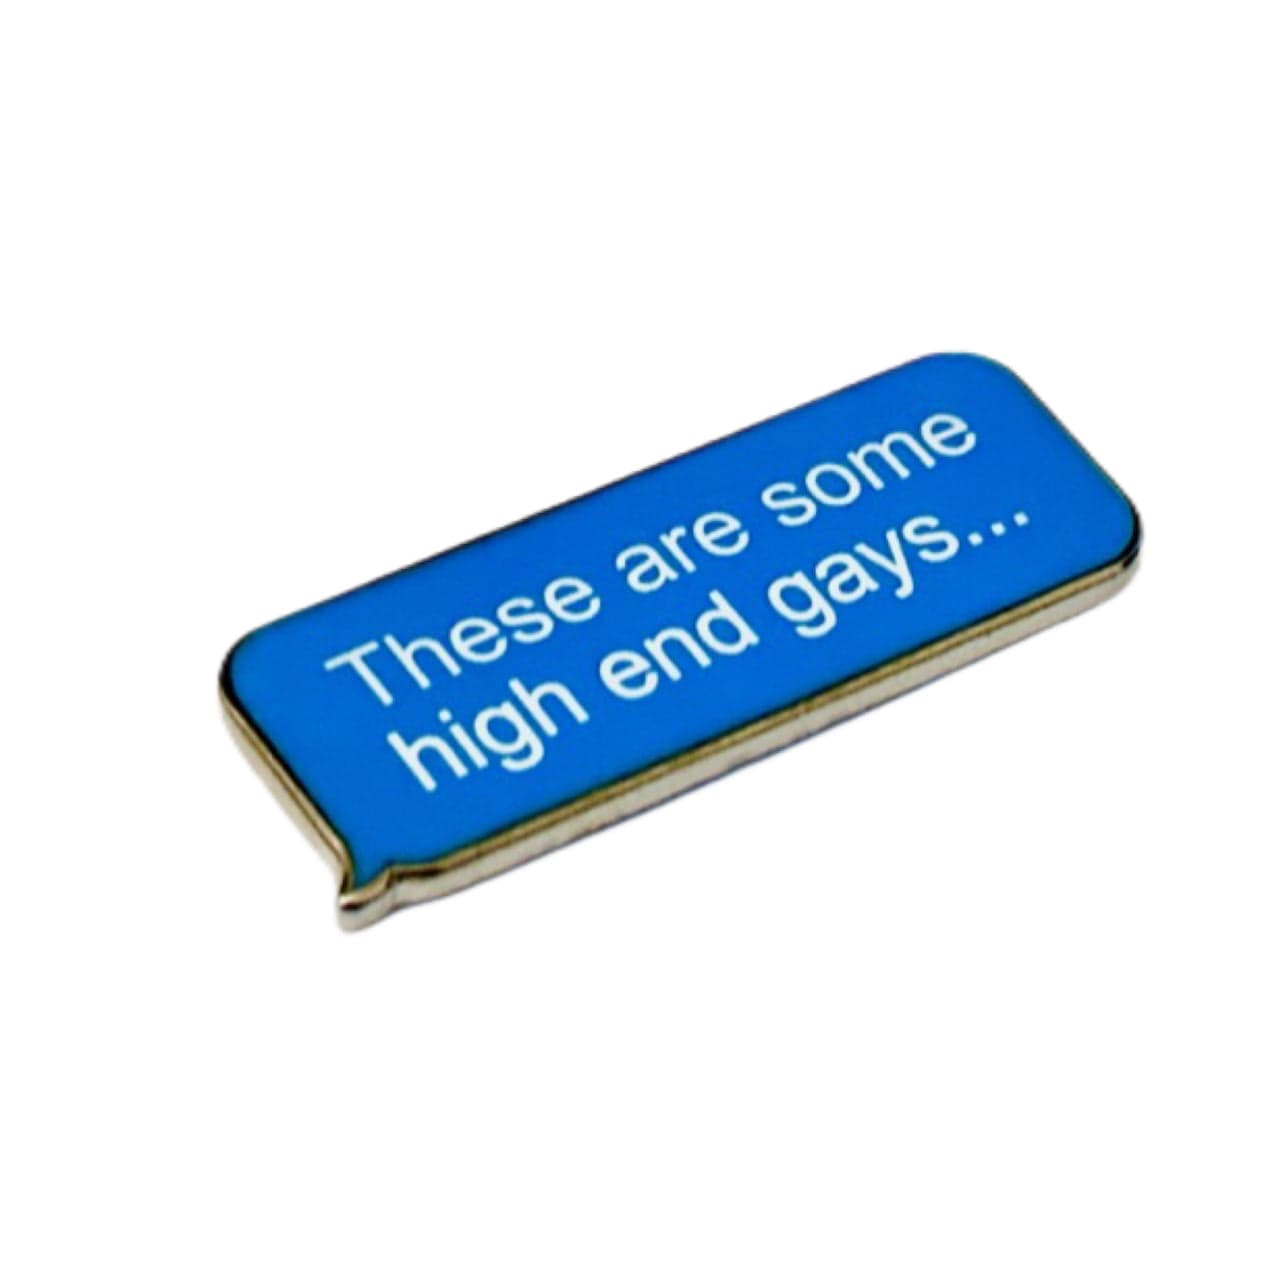 Pinbuds Enamel pin These are some high end gays pin (Jennifer coolidge quote in White lotus)